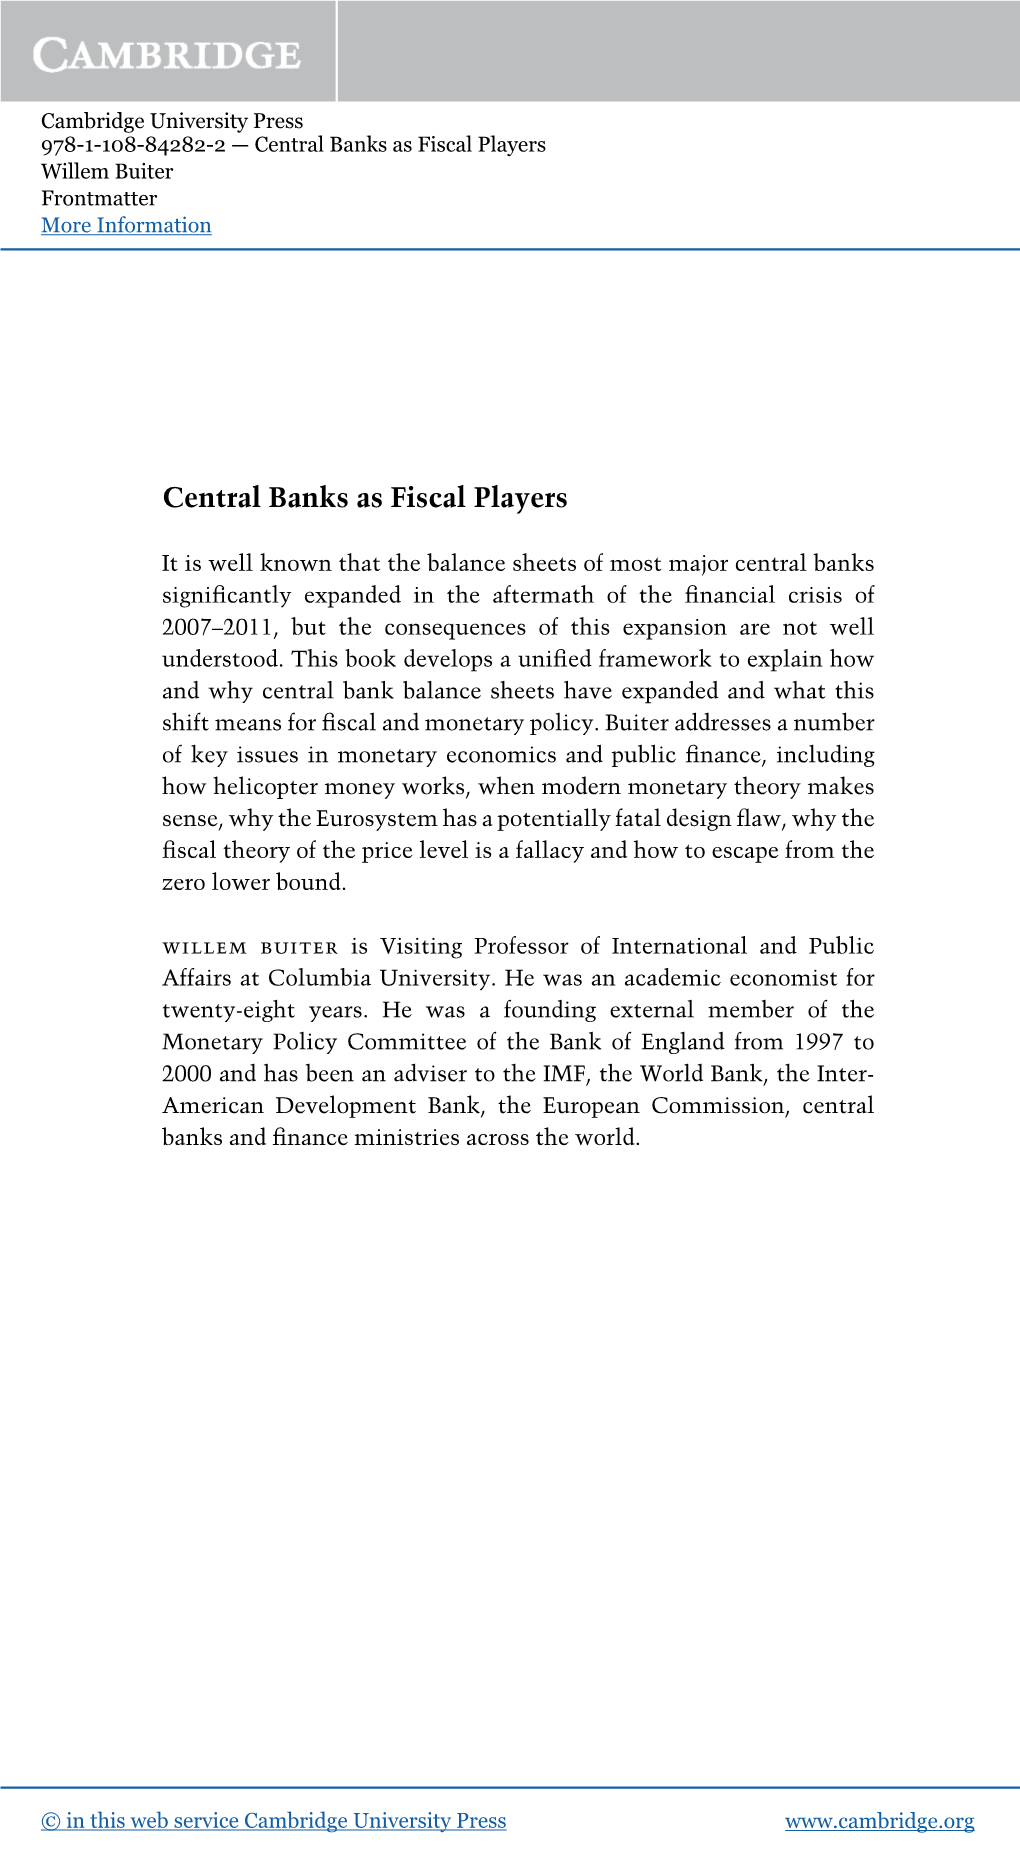 Central Banks As Fiscal Players Willem Buiter Frontmatter More Information